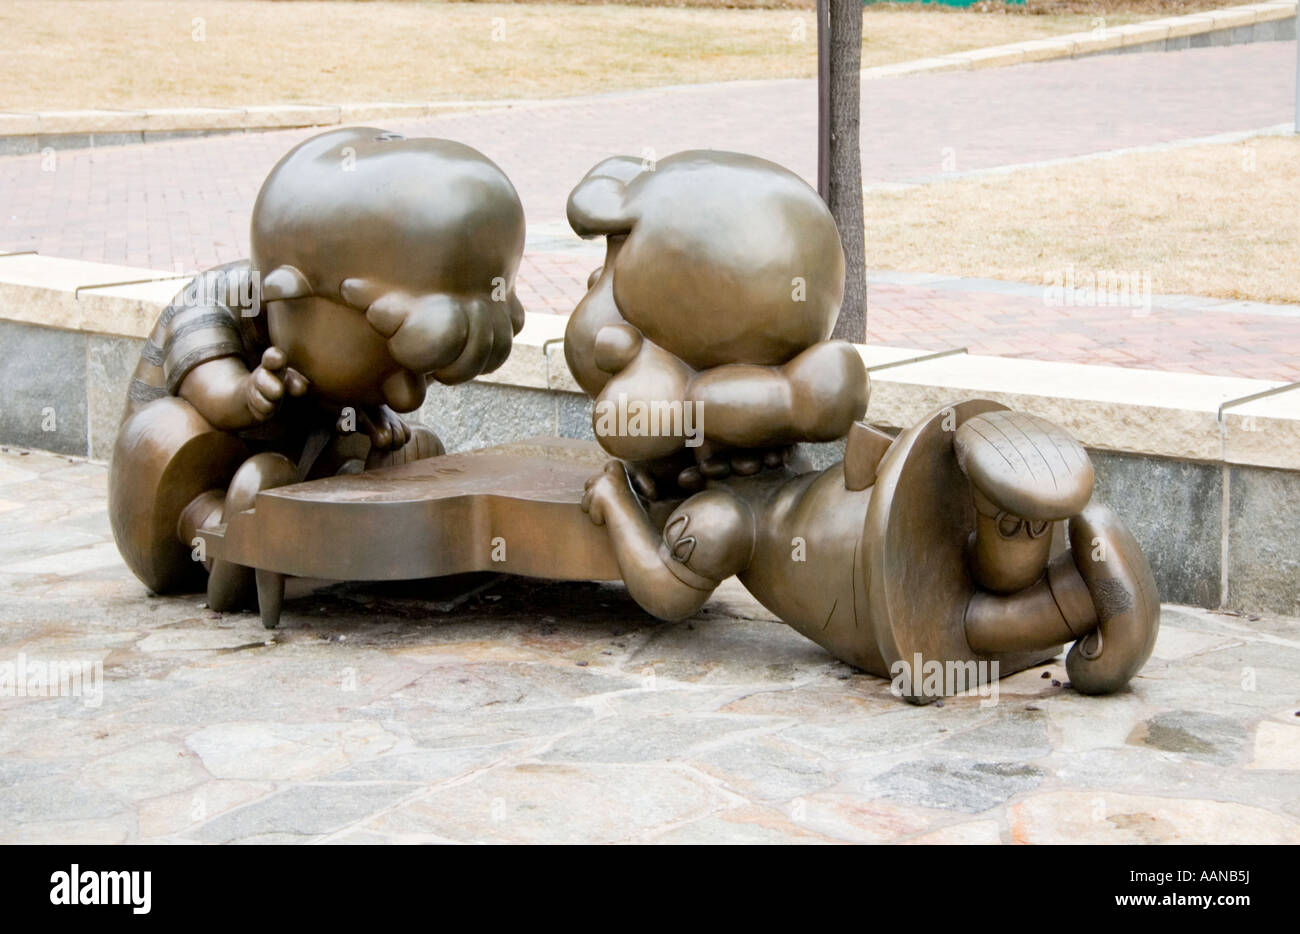 Sculpture of Peanuts characters Lucy and Schroeder. Wells Fargo WinterSkate St Paul Minnesota USA Stock Photo